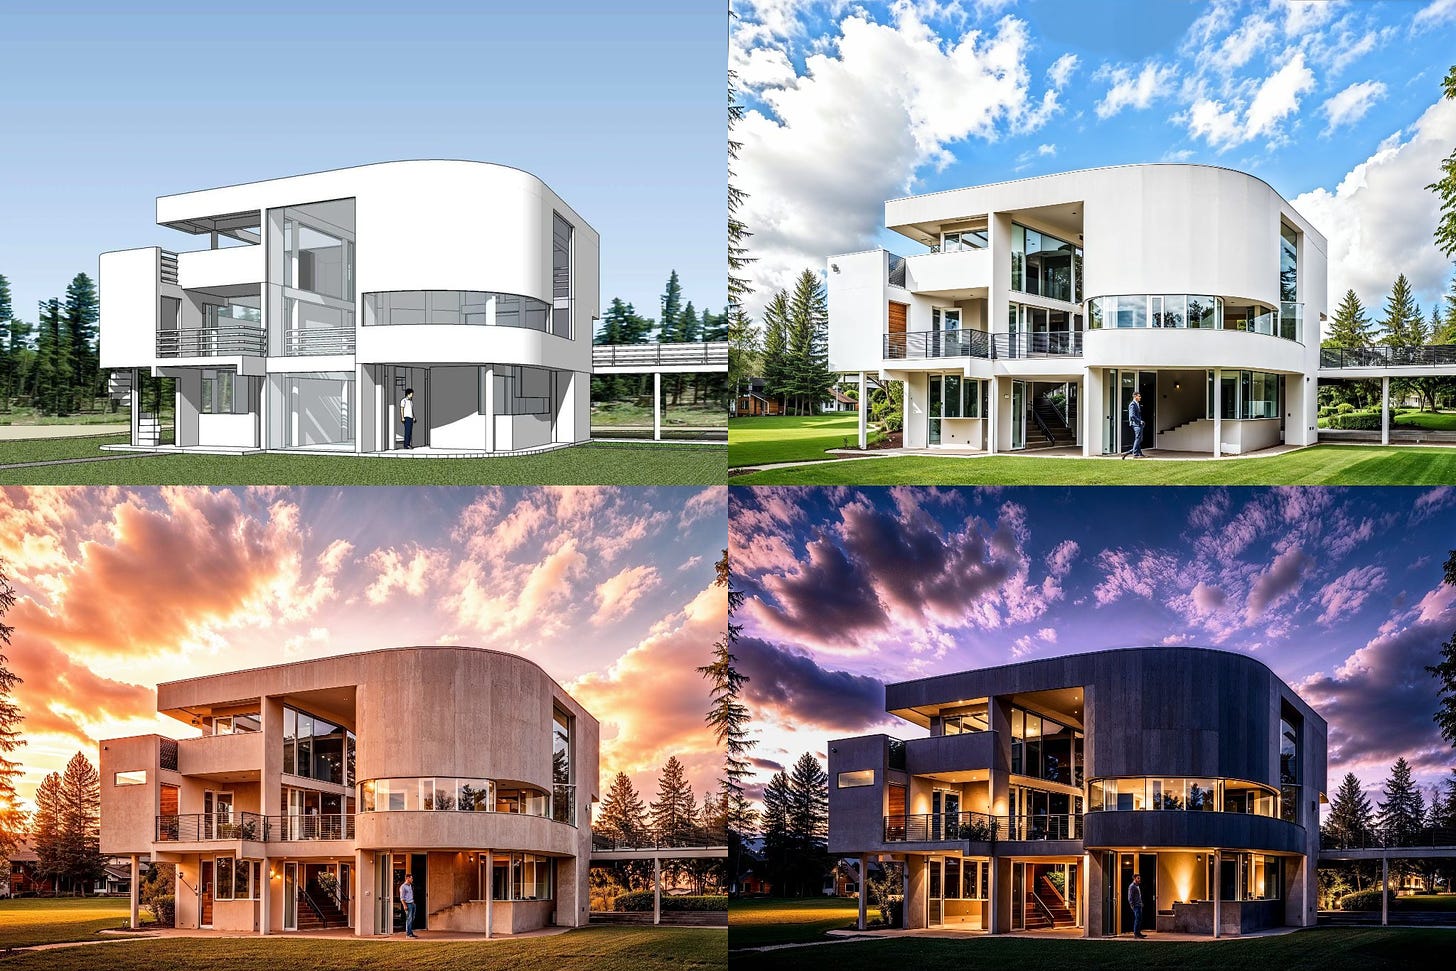 Grid of four images showing a modernist house in different scenes: 1. Simple outlines; 2. Daytime, cloudy sky; 3. Dusk, concrete cladding; 4. Night, illuminated